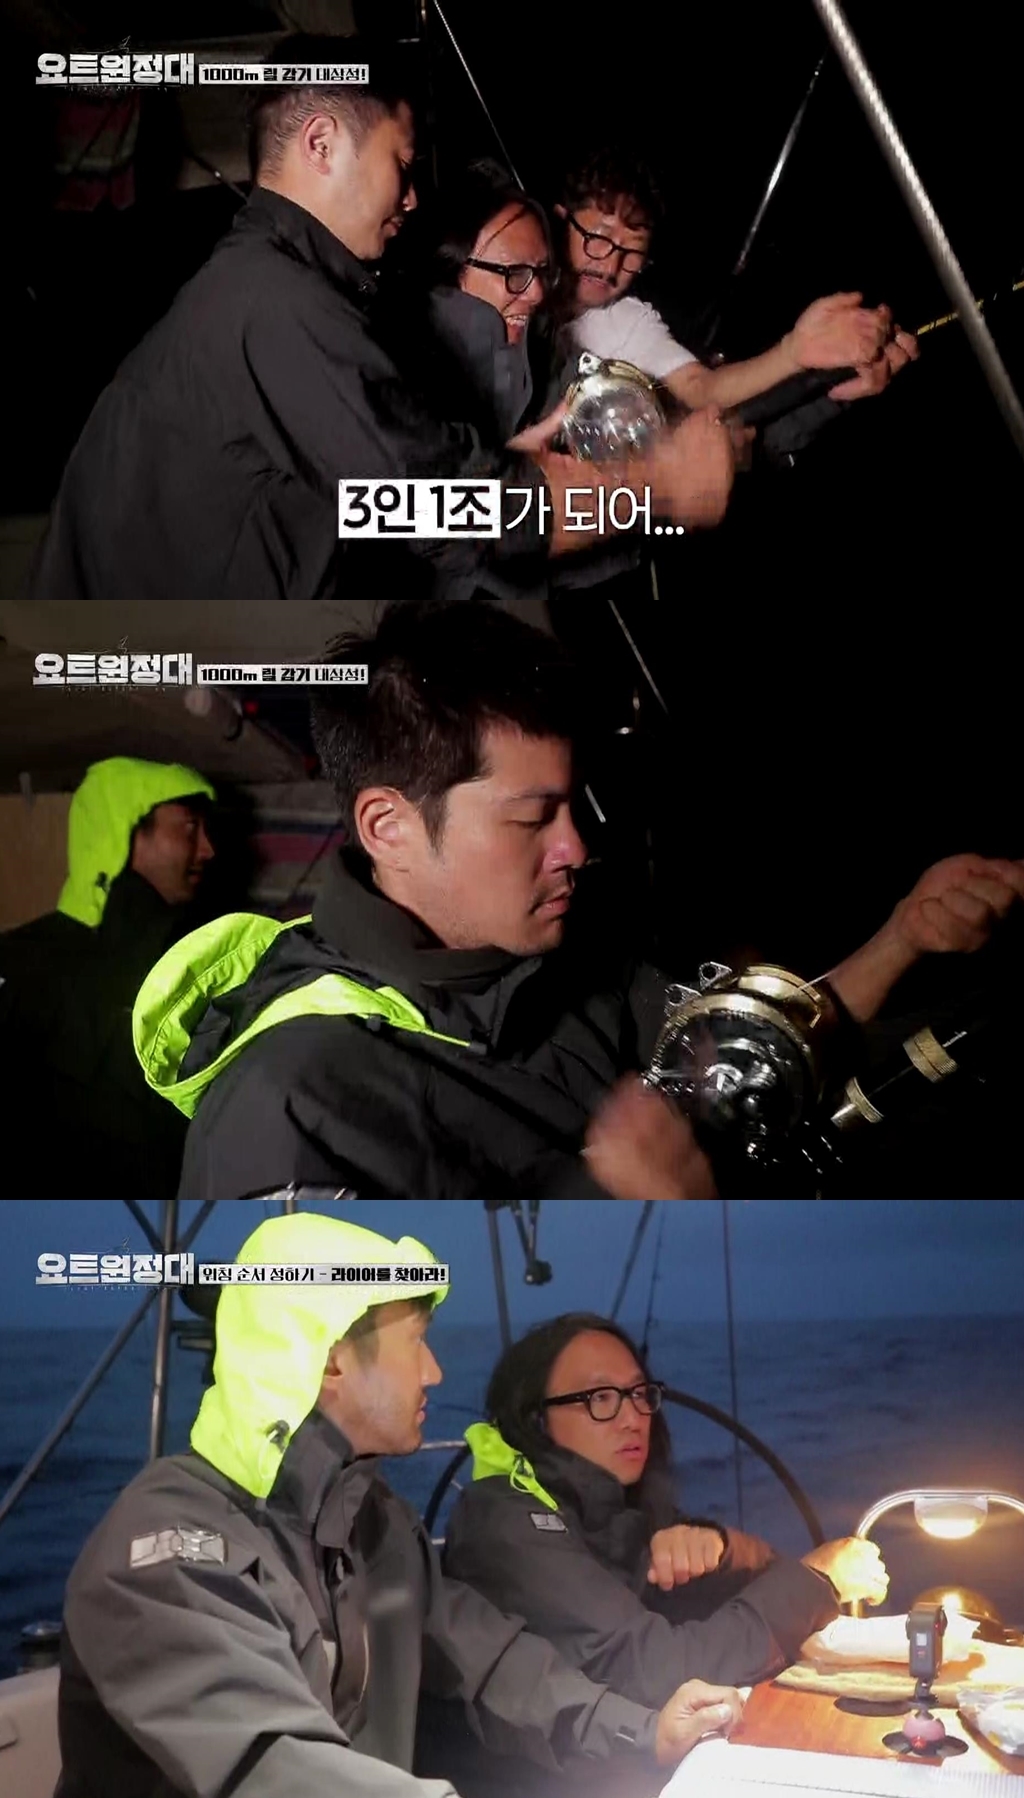 What is the story of the yacht expedition suddenly working in the group of moon nights?MBC Everlons yacht Expedition, which will be broadcast on the 28th, depicts Jin Goo - Choi Siwon - Jang Ha - Song Ho Joon, who departs vigorously for a new purpose after deciding unexpected return.The members who have found peace again after the storm will find their own yacht pleasure.On this day, the members of the Yacht Expedition said that they had a peaceful day for a long time, drinking warm coffee on a calm sea and chatting.But the pleasure is that for a while, an unexpected emergency occurs, and the yacht is loud with a disturbance at once, and Captain Kim Seung-jins fishing line was released during the voyage.However, the length of the loose fishing line was 1,000 meters, and the crew fell into the mens roof.But then the yacht expedition crews started their teamwork to help Captain Kim Seung-jin, one by one, and they carried out a fishing line Flu long.The line was wrapped around the arm to fall off, but the 1000m fishing line was not enough for Flu.So, the idea of ​​collaborating with a group of three people came out, and the infinite fishing line Flu Hell was unfolded.The images of the members immersed in the fishing line Flu in the public photos make us guess the emergency that occurred at the moon night.What was the result of the teamwork full operation?iMBC  Photos Offering MBC Everlon